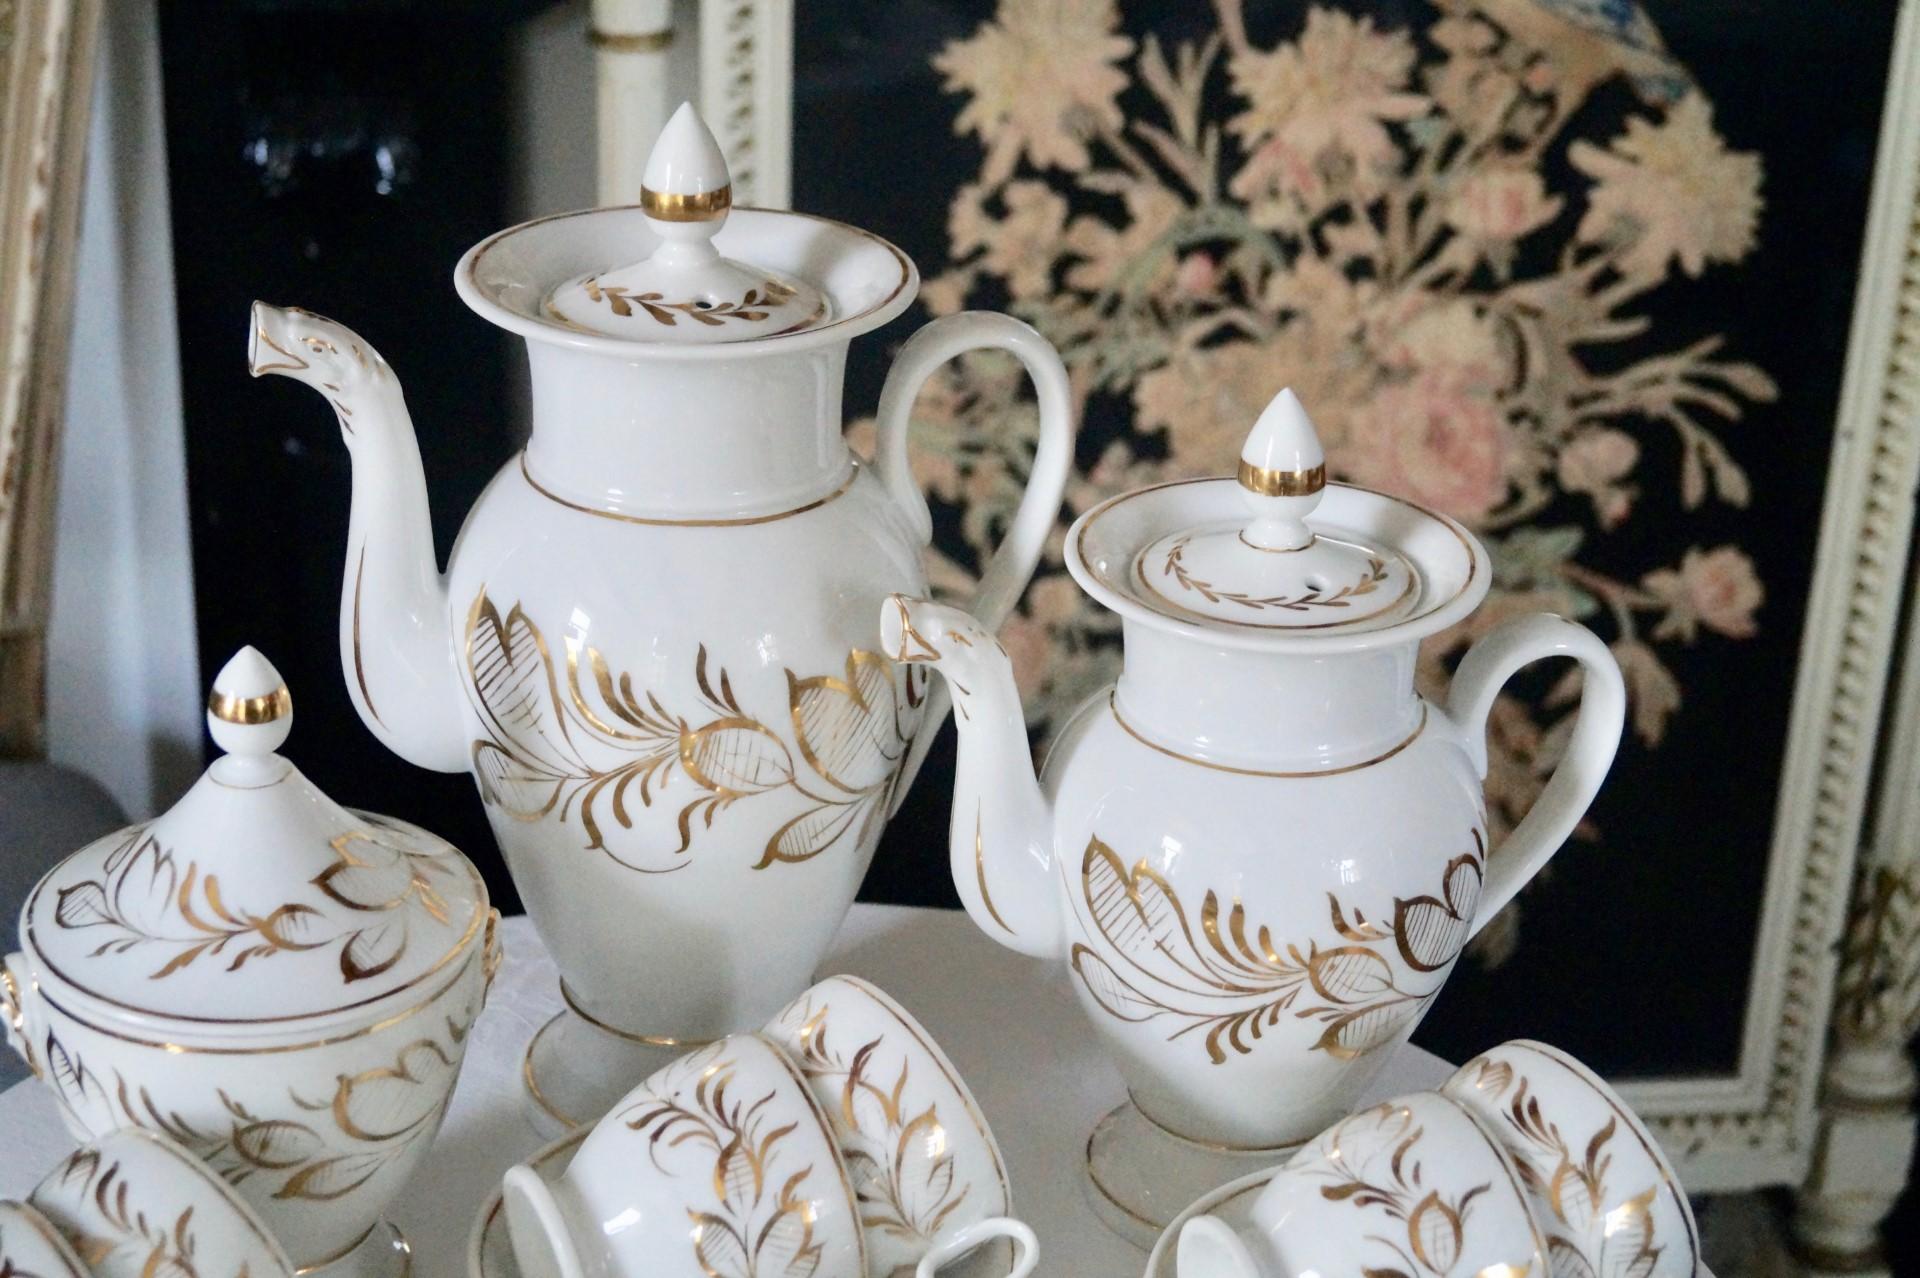 Beautiful antique Old Paris porcelain (Porcelaine de Paris) coffee tea service from ca 1850-1880!

Very delicately hand decorated with gold. 

Very good condition for its age, some gold wear are present. Unfortunately the milk jug is